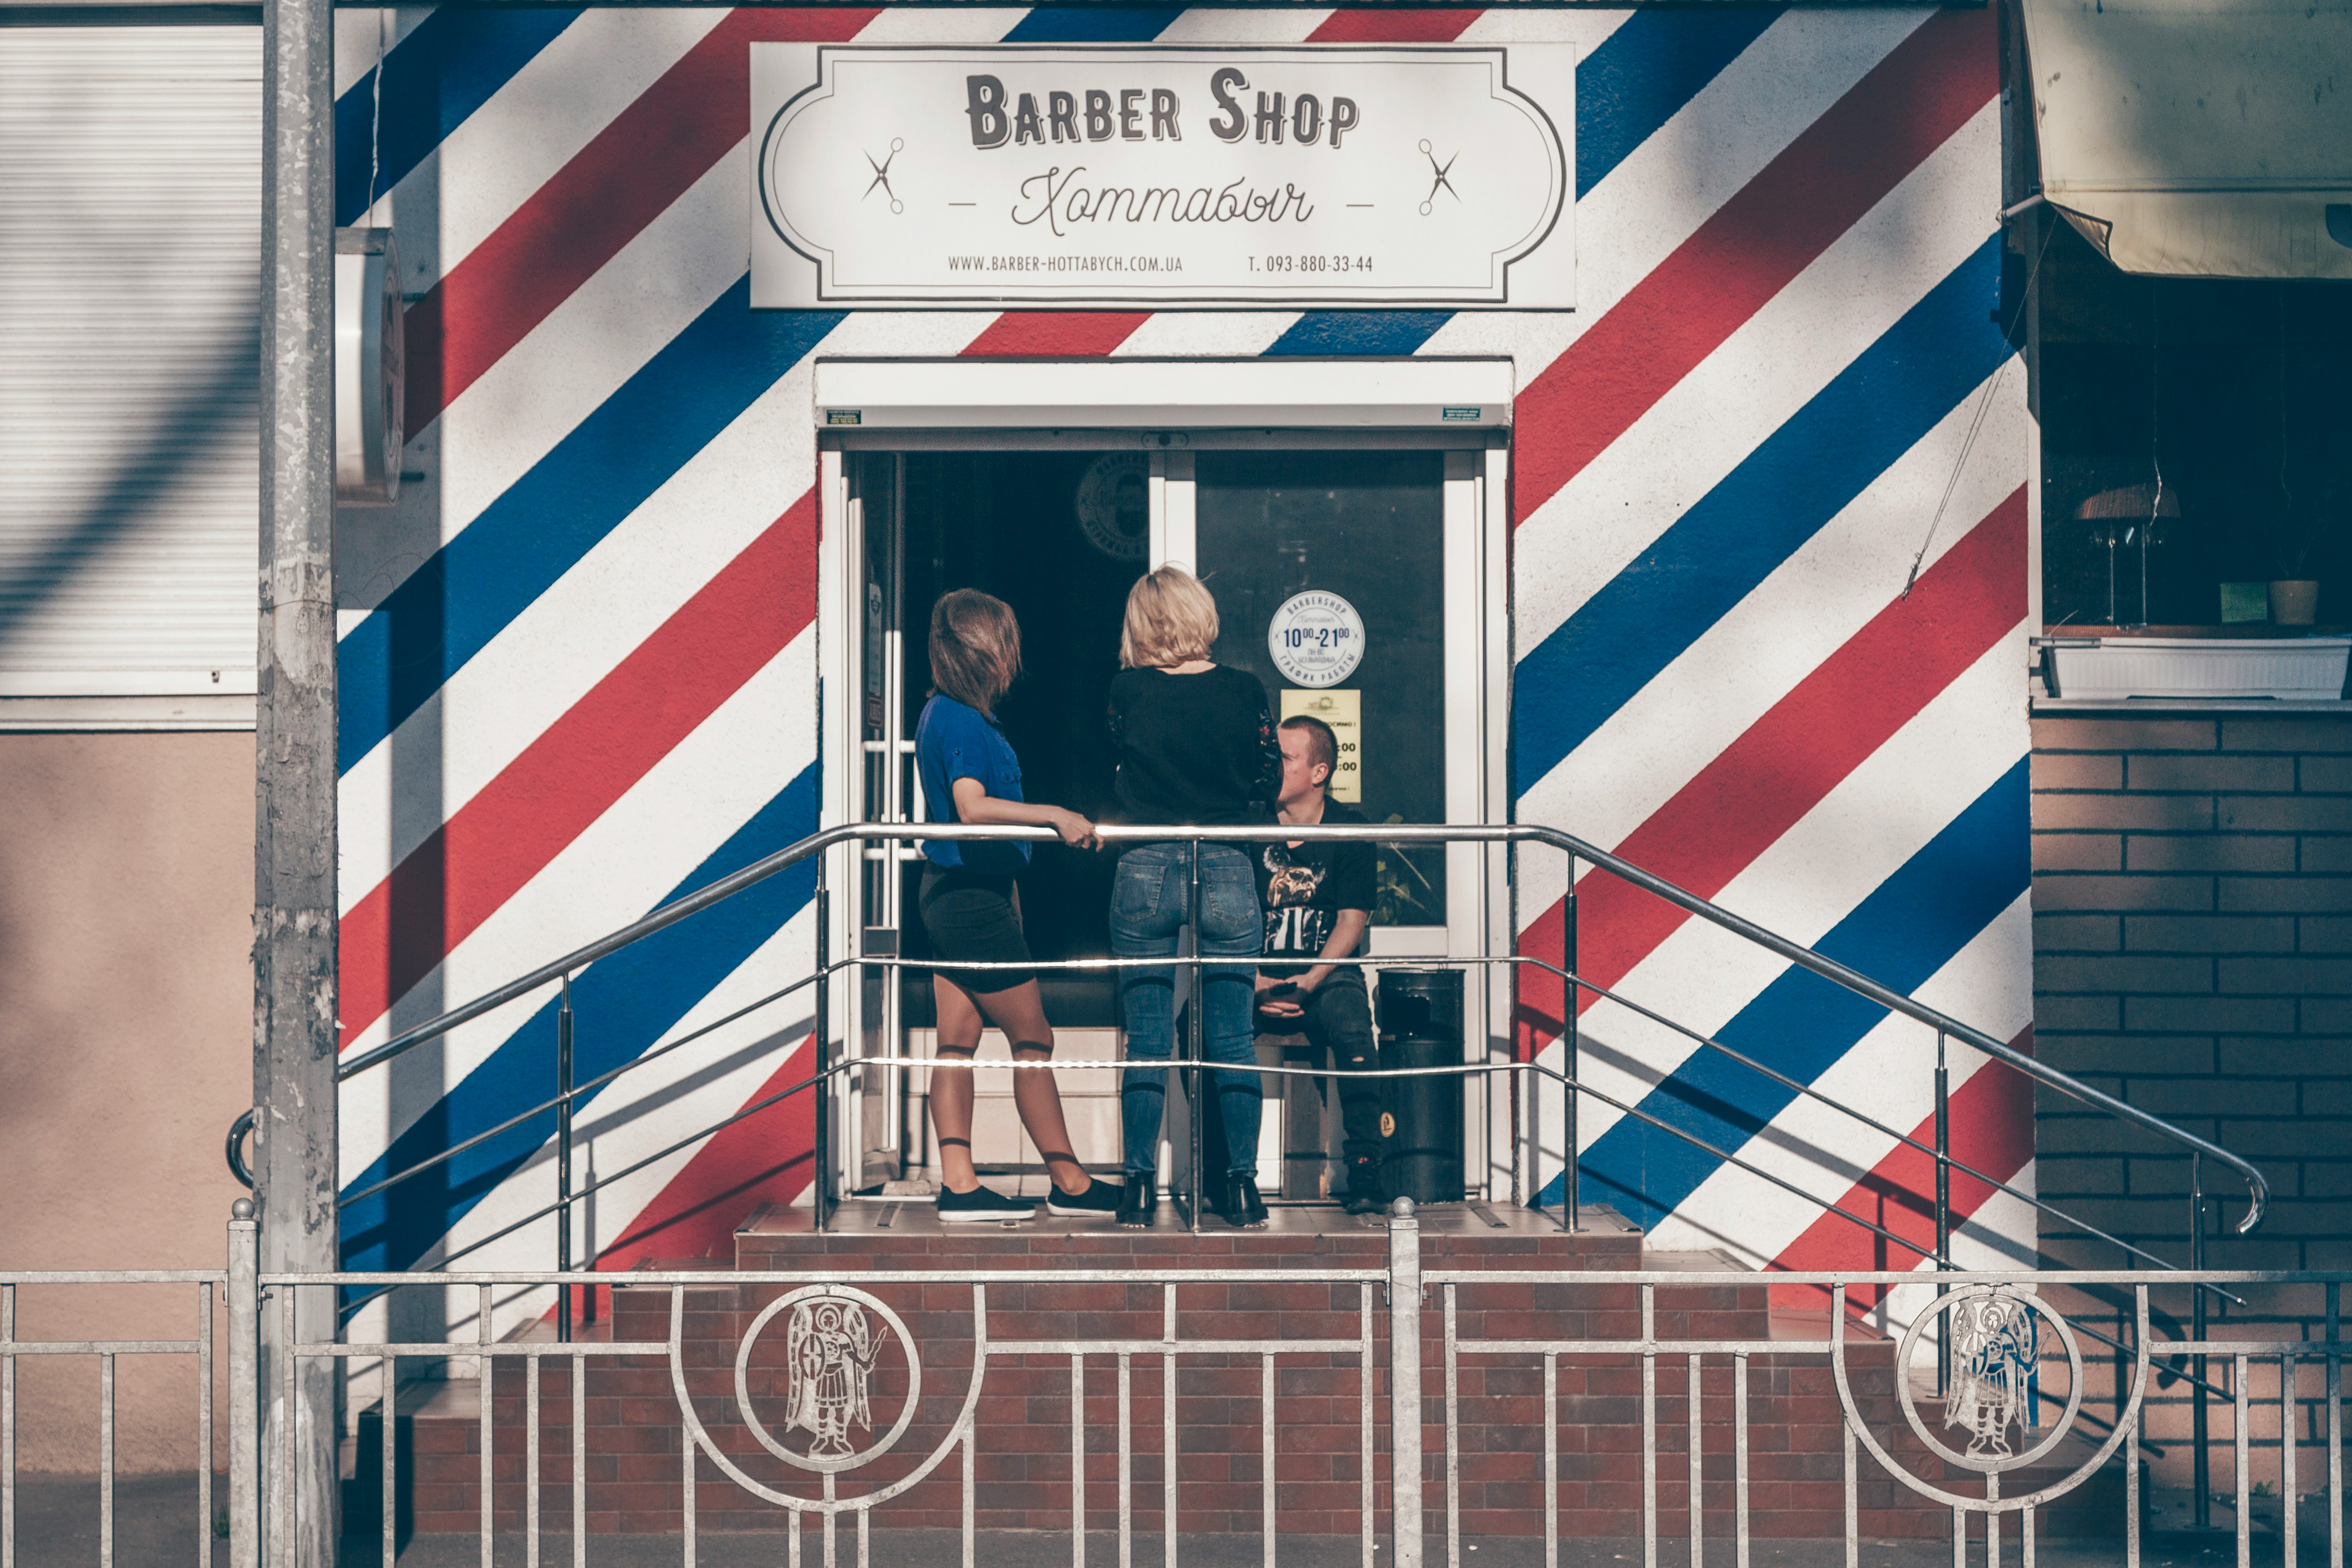 two women and man outside barber shop building